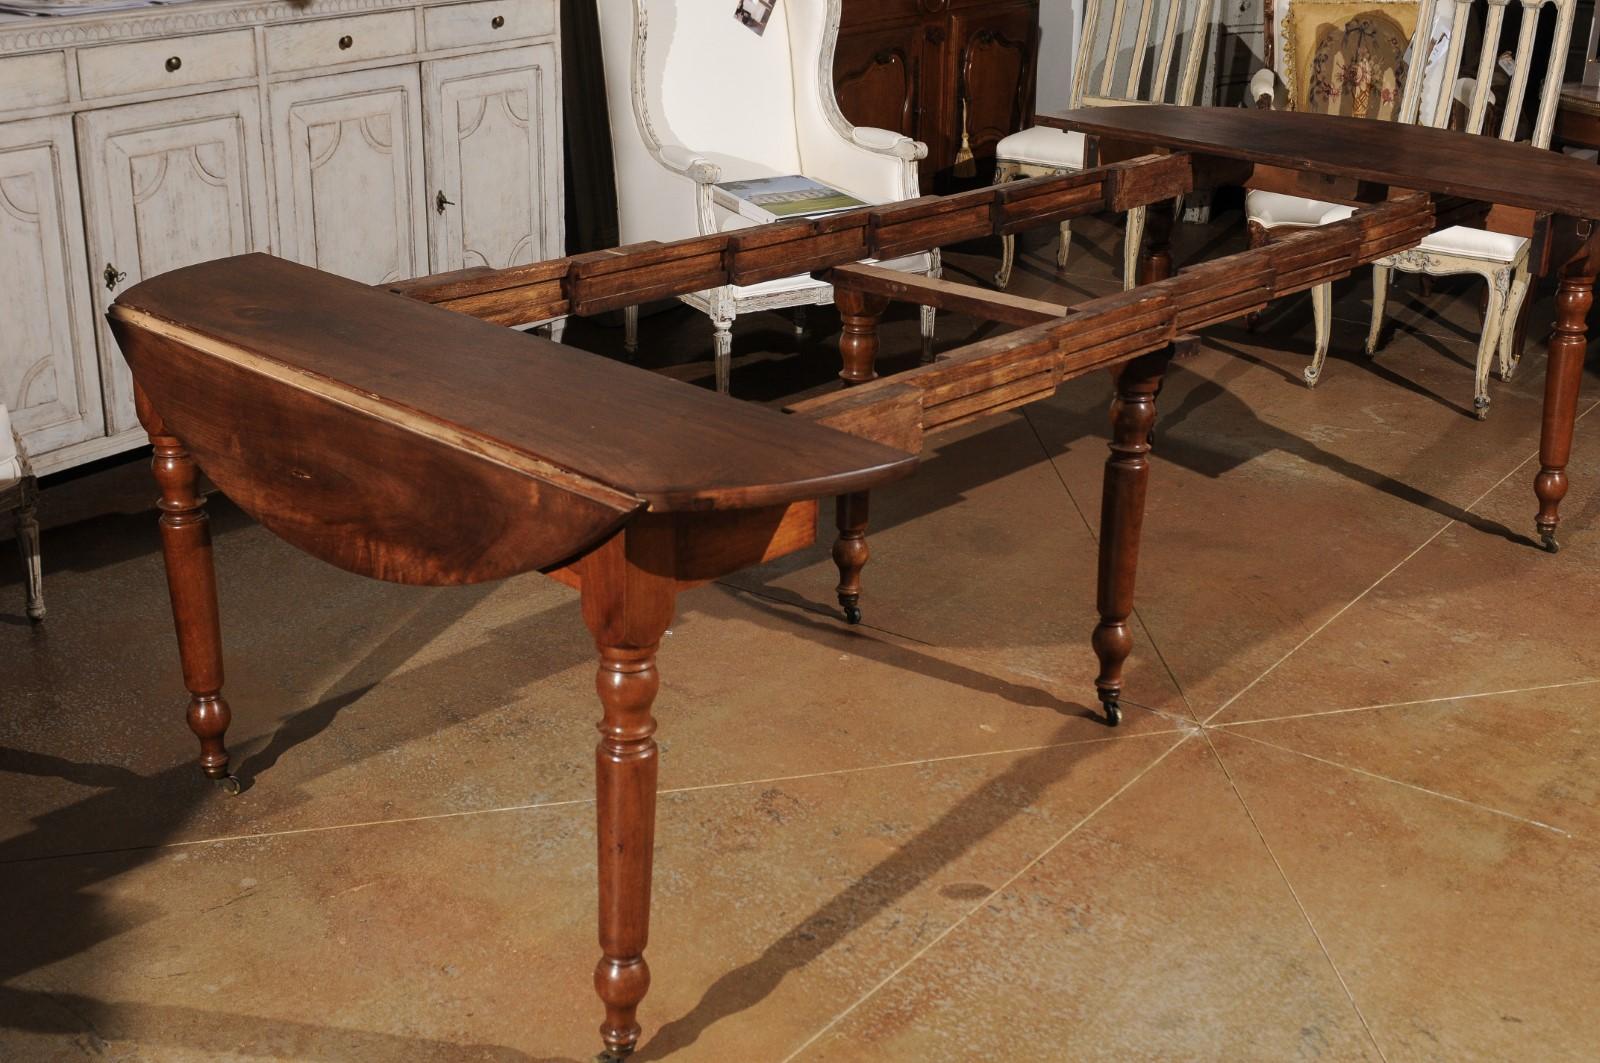 A French Louis-Philippe period oval walnut dining room extension table from the mid-19th century with drop leaves, turned legs and casters. Born in the second quarter of the 19th century during the reign of France's last king Louis-Philippe, this